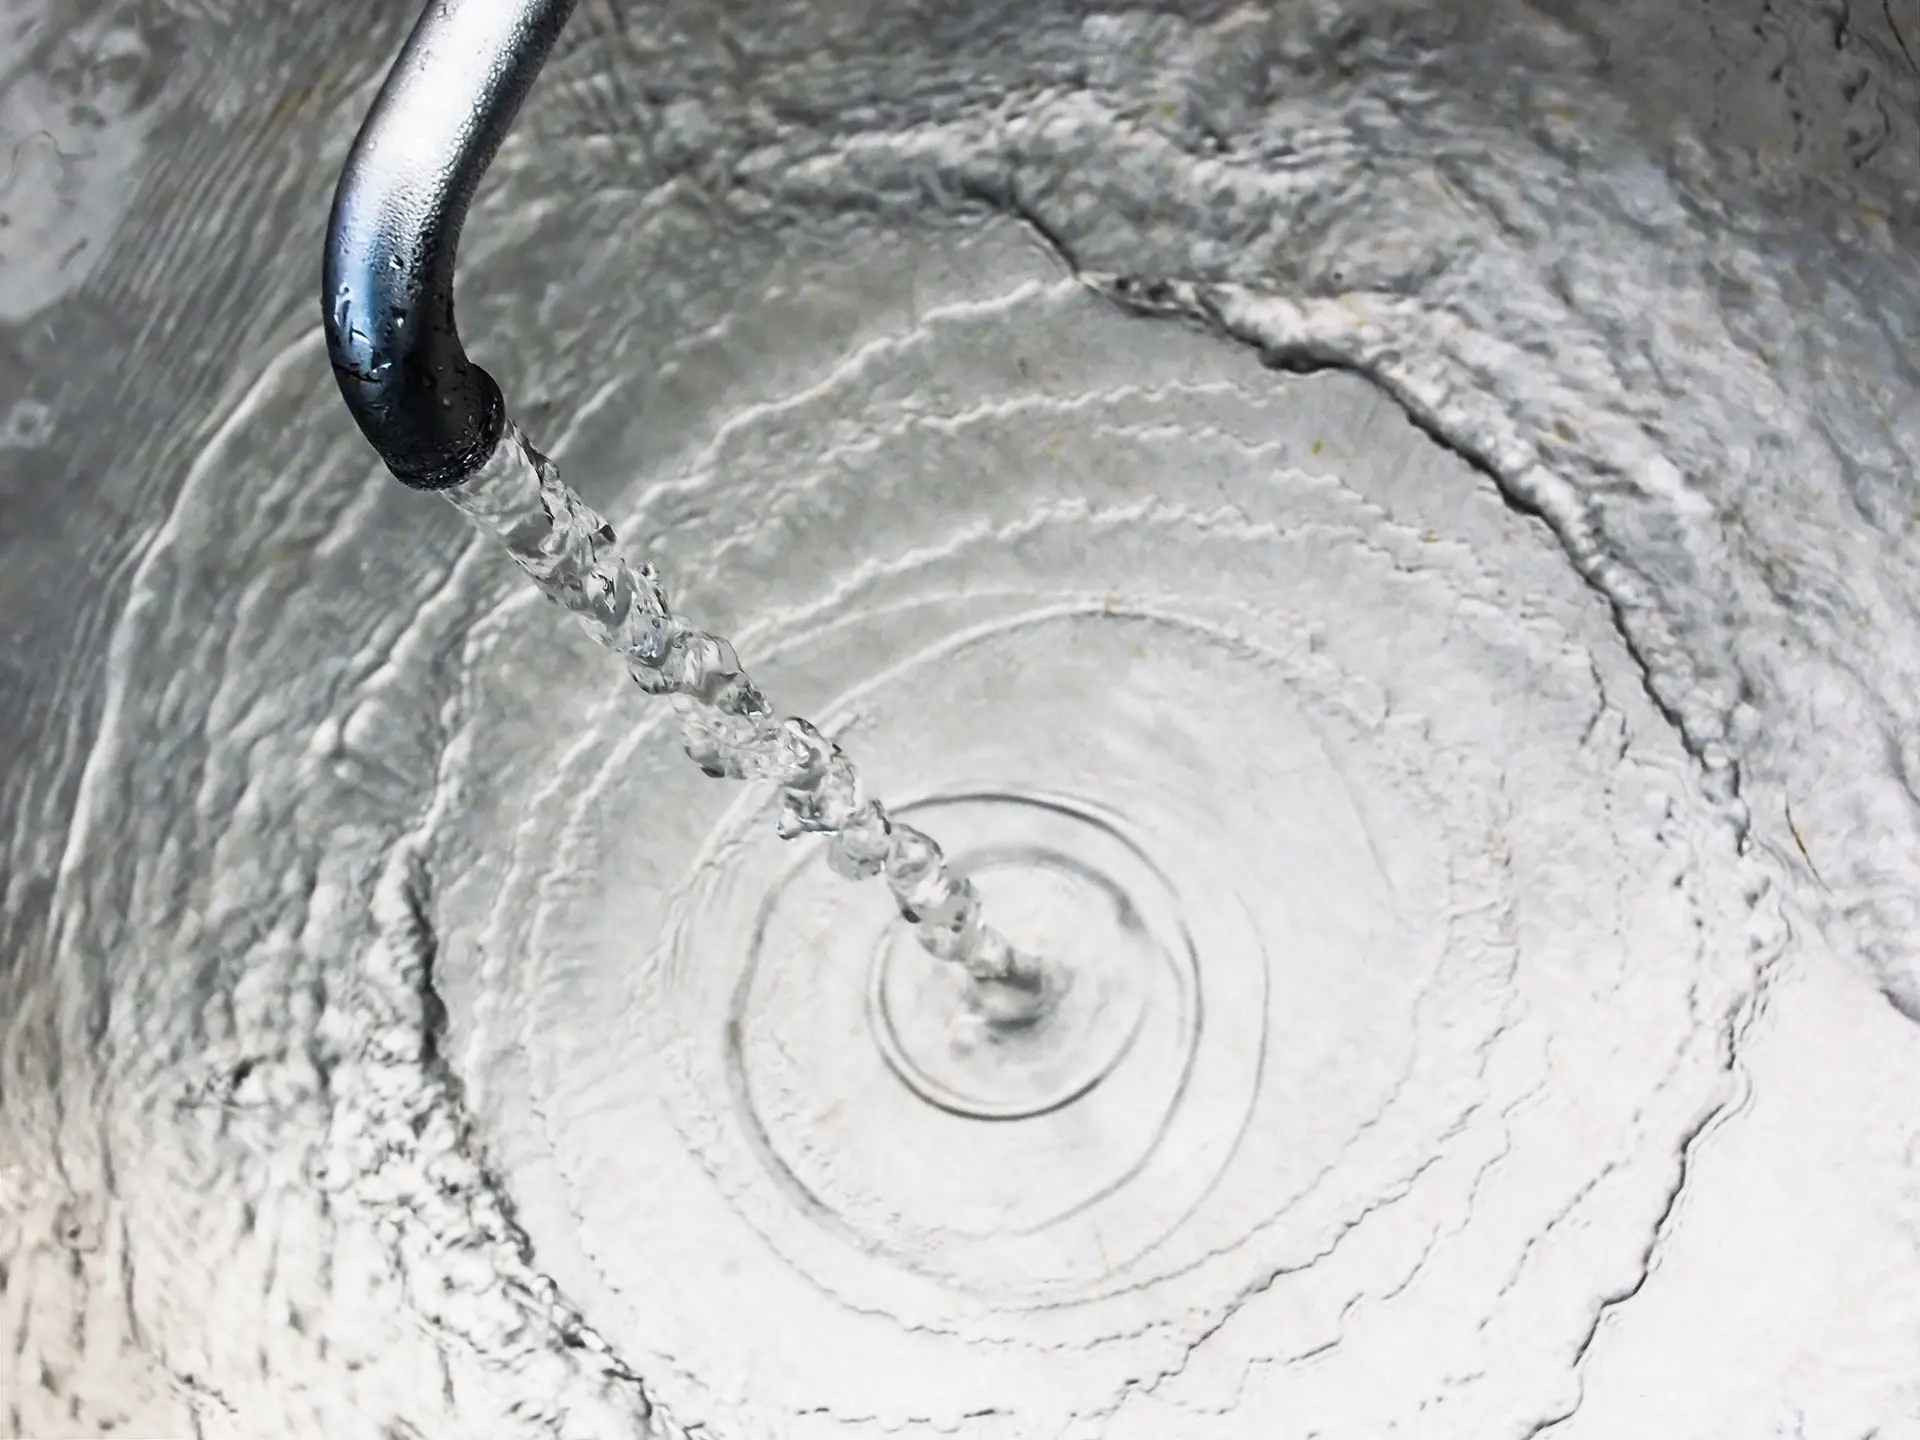 Clean water coming out of a tap into a sink